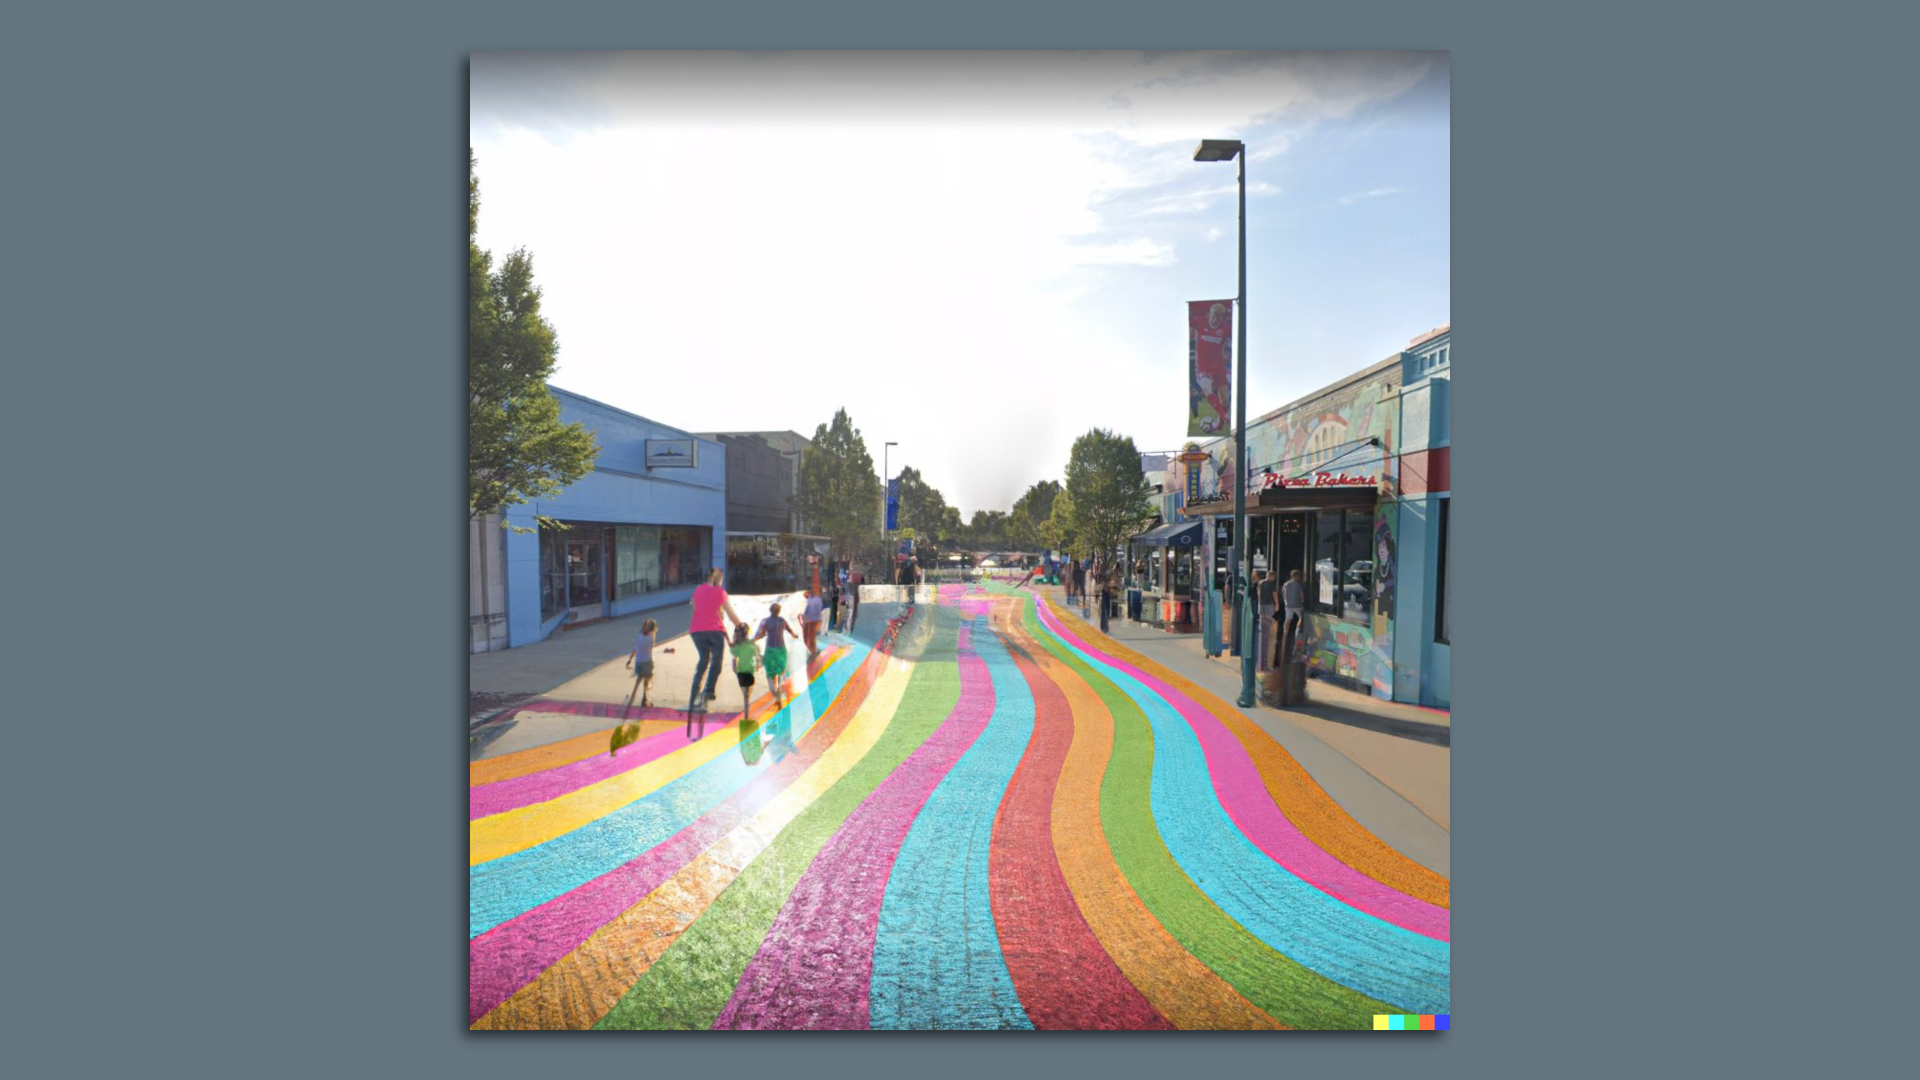 Carytown with no cars and a rainbow painted in the middle of the street